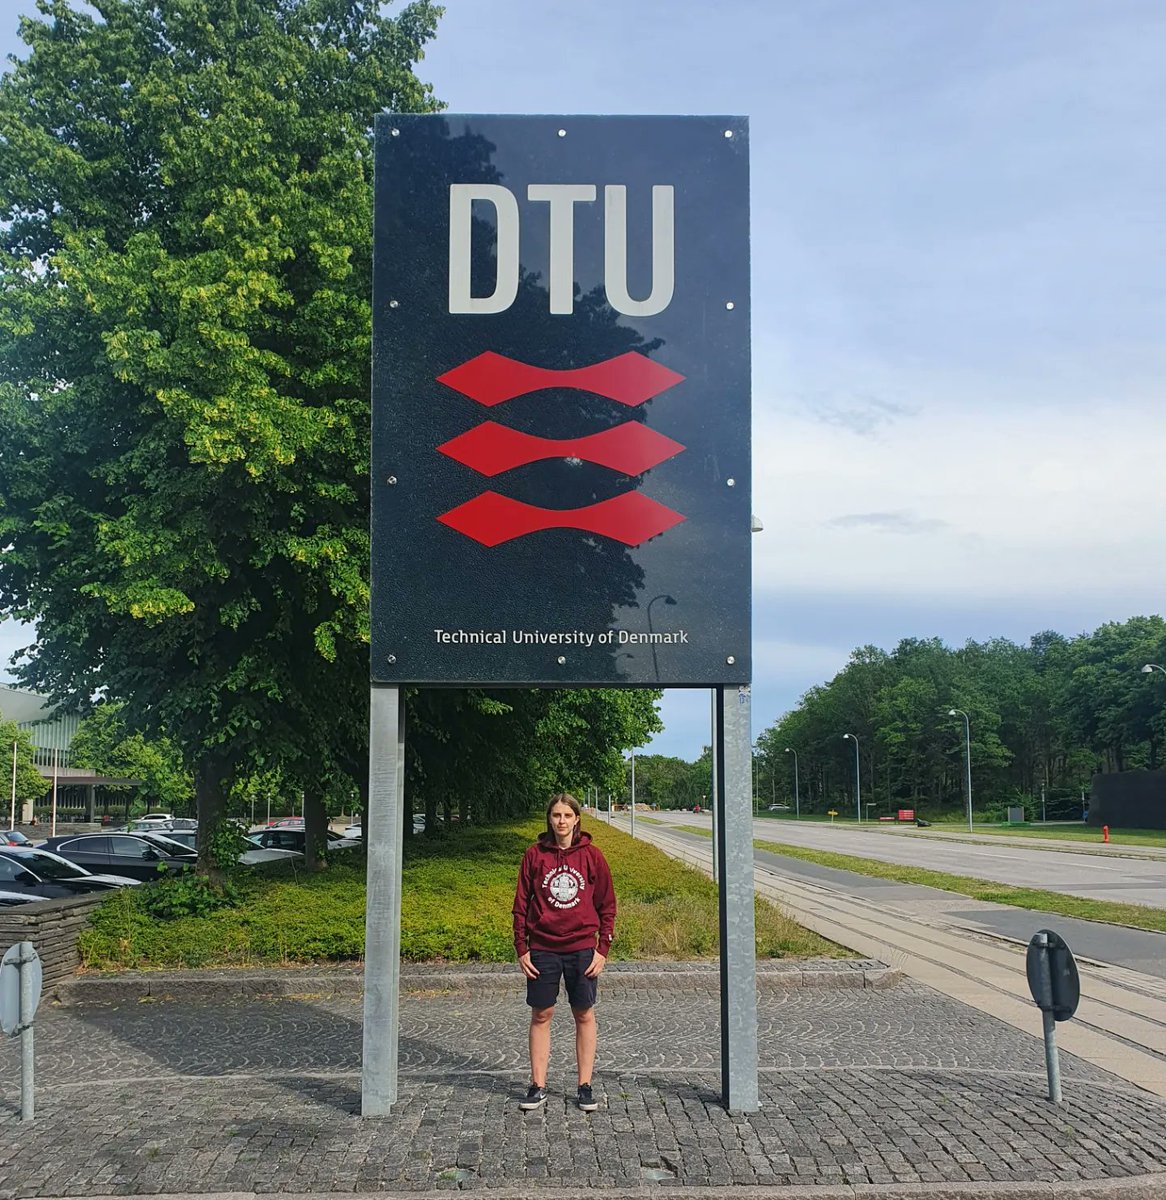 🇩🇰 Denmark 2022 🇩🇰 Sad to be leaving after an incredible 6 months! It's been a wild ride, but I've absolutely fallen in love with the people, the place and the experiences I've had. This isn't goodbye, simply see you later 😊🙃❤ @DTUtweet